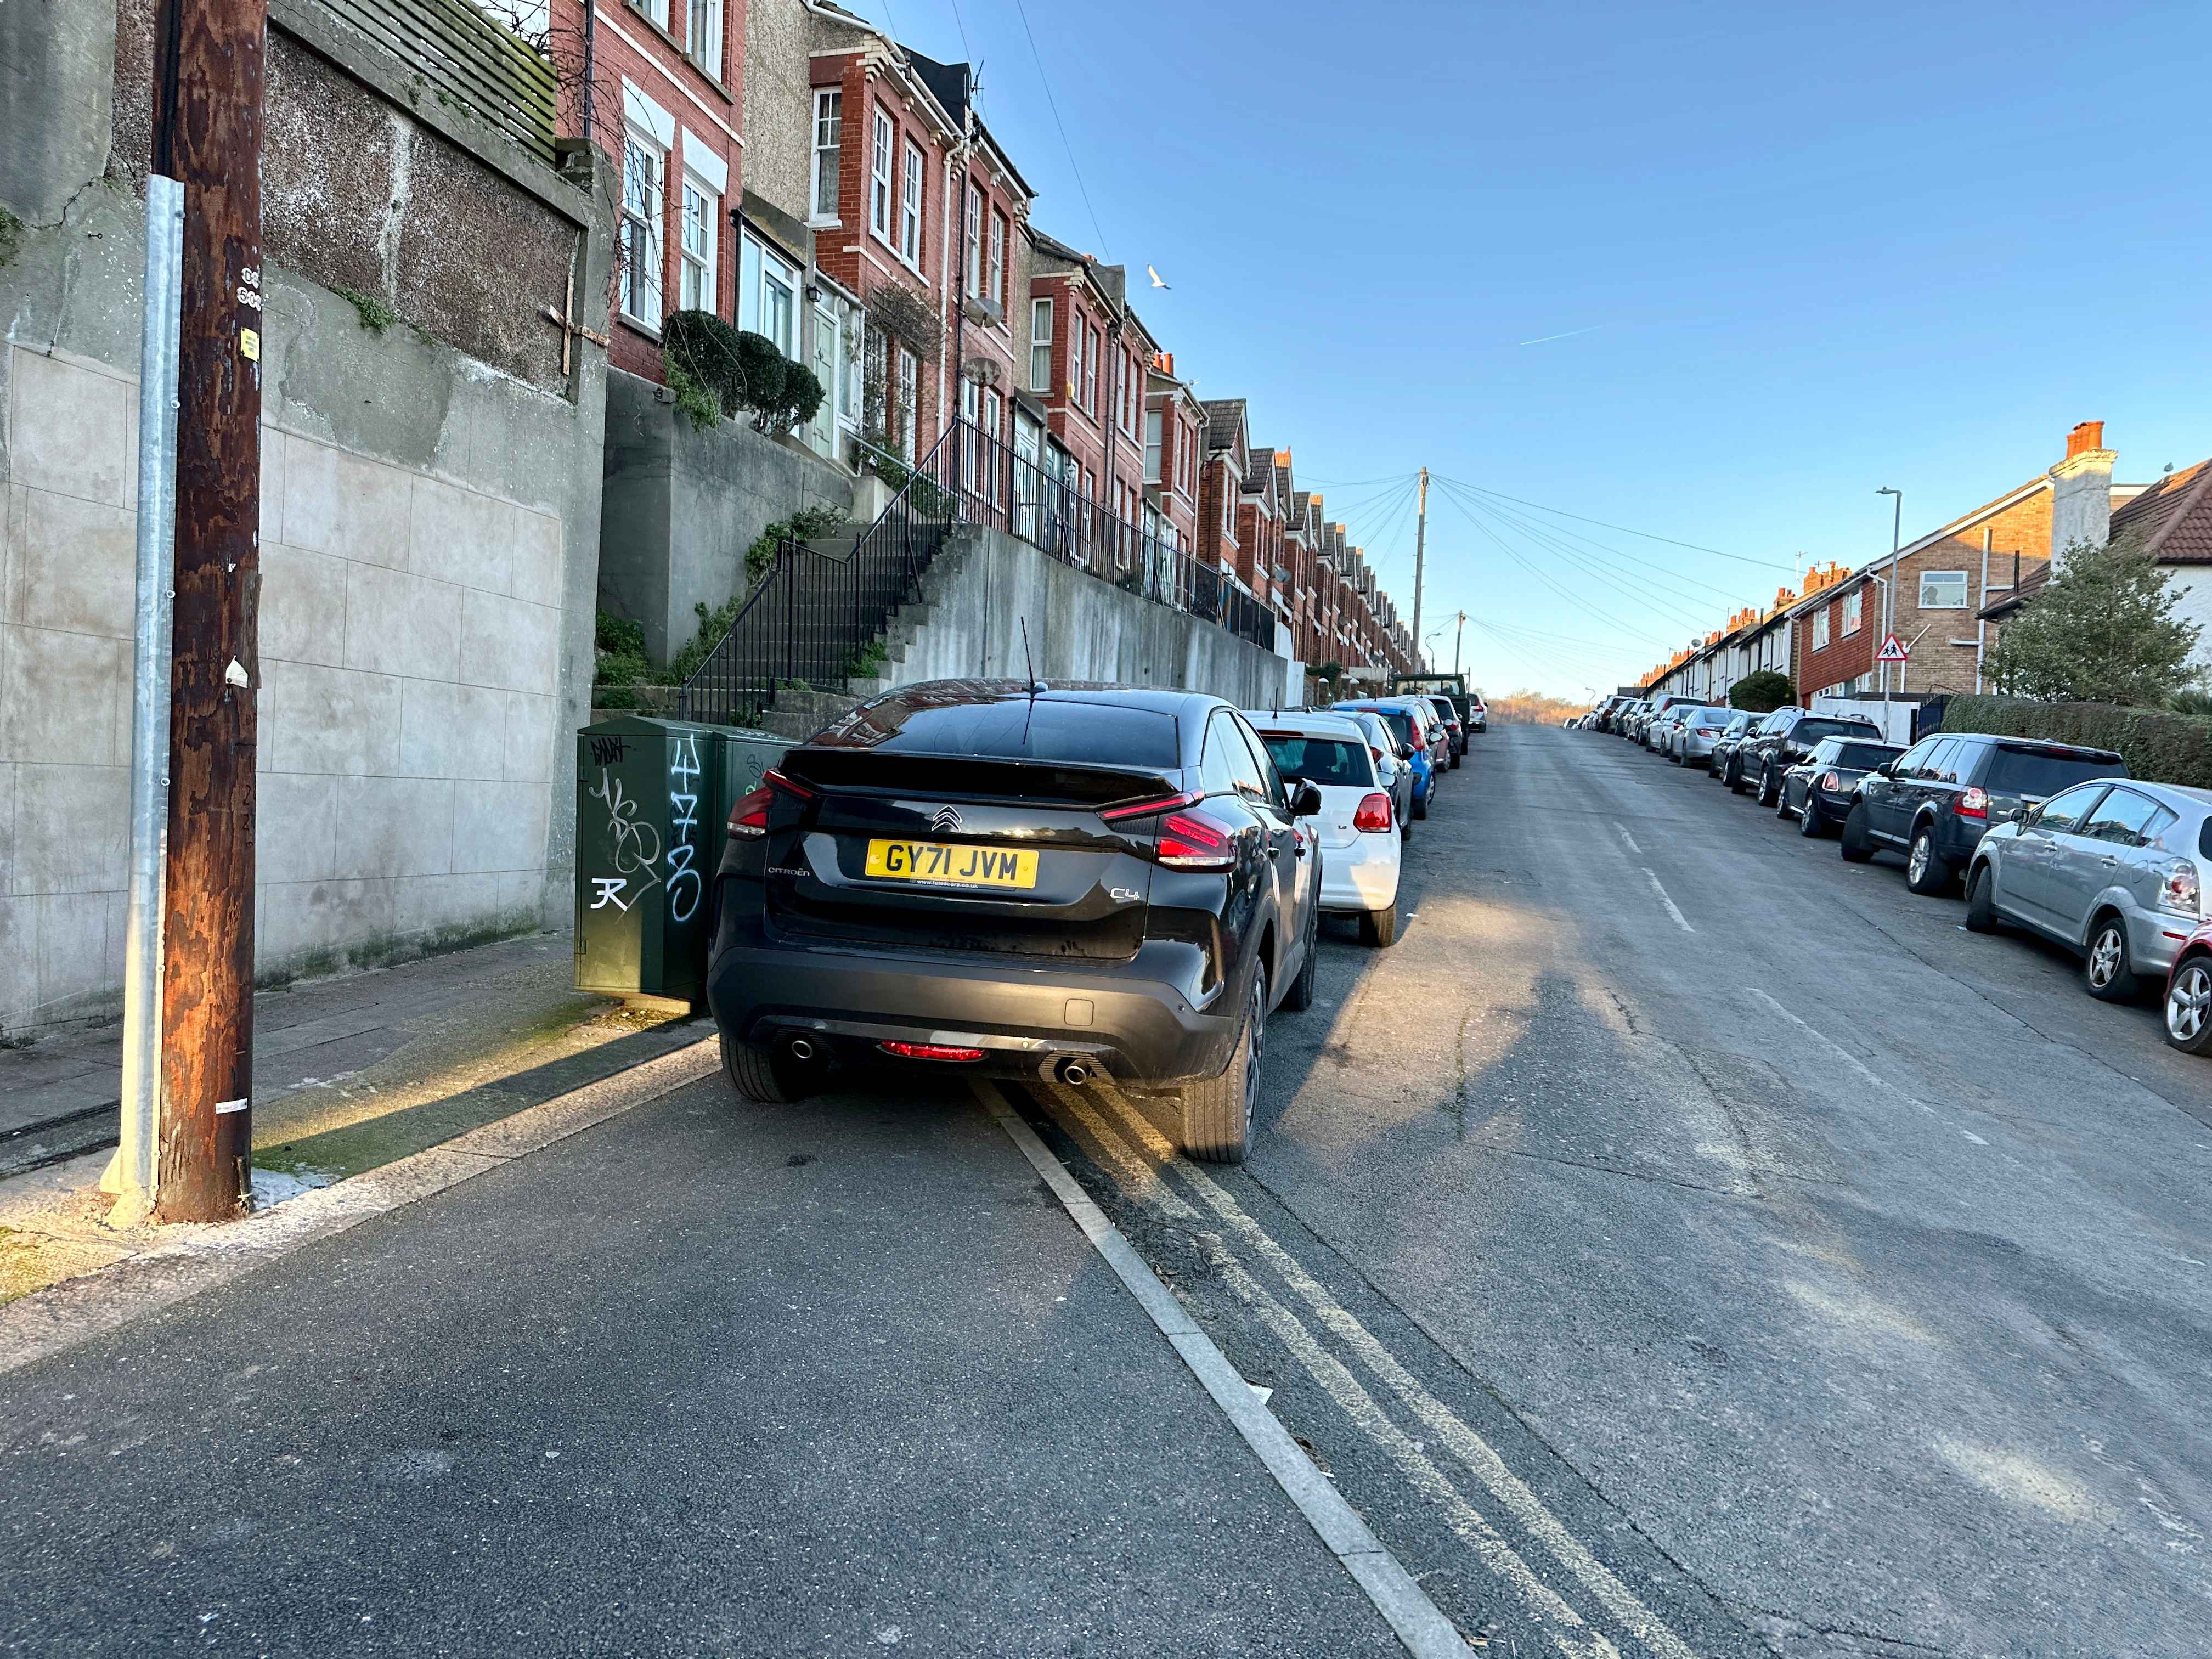 Photograph of GY71 JVM - a Black Citroen C4 parked in Hollingdean by a non-resident who uses the local area as part of their Brighton commute. The first of two photographs supplied by the residents of Hollingdean.